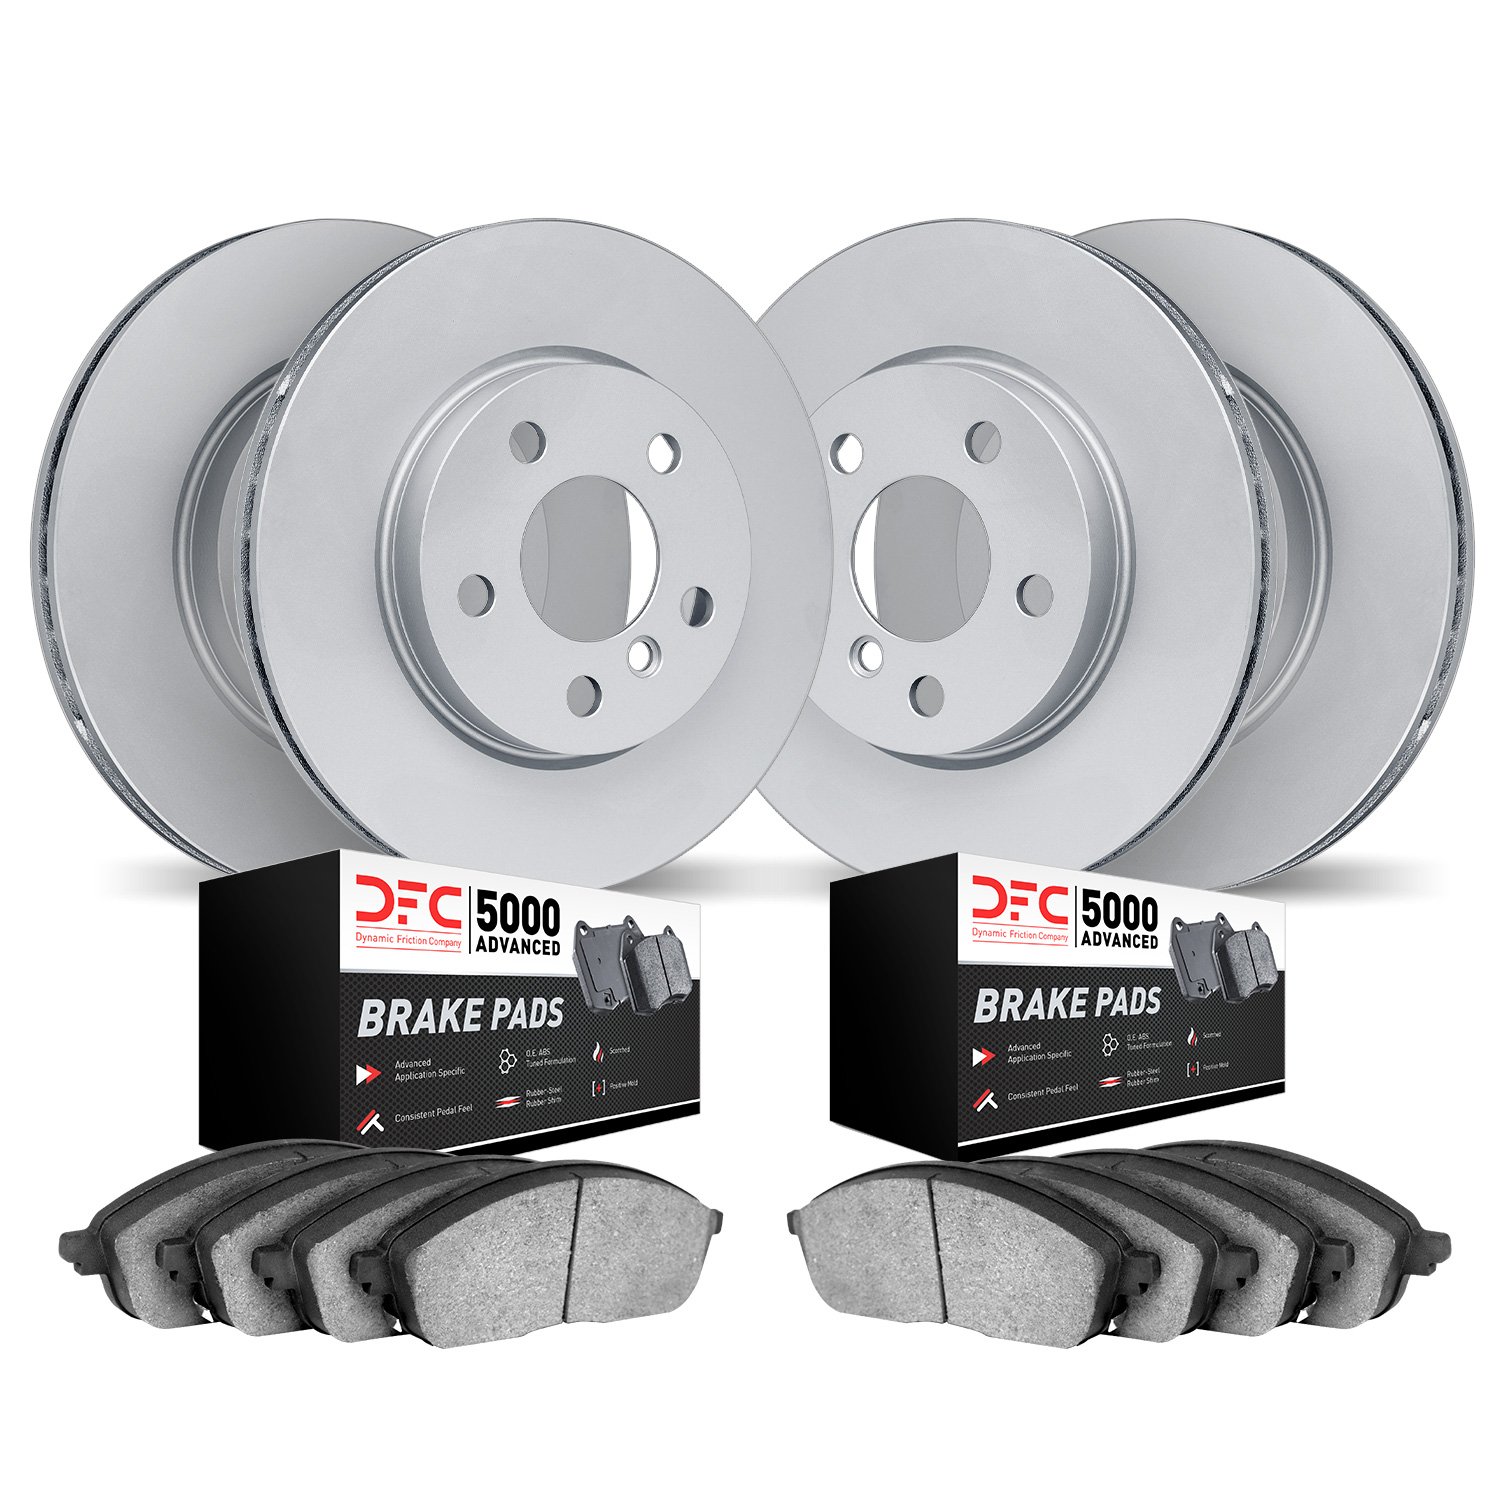 9504-63187 GEOMET Brake Rotors w/5000 Advanced Brake Pads Kit, 2019-2019 Mercedes-Benz, Position: Front and Rear